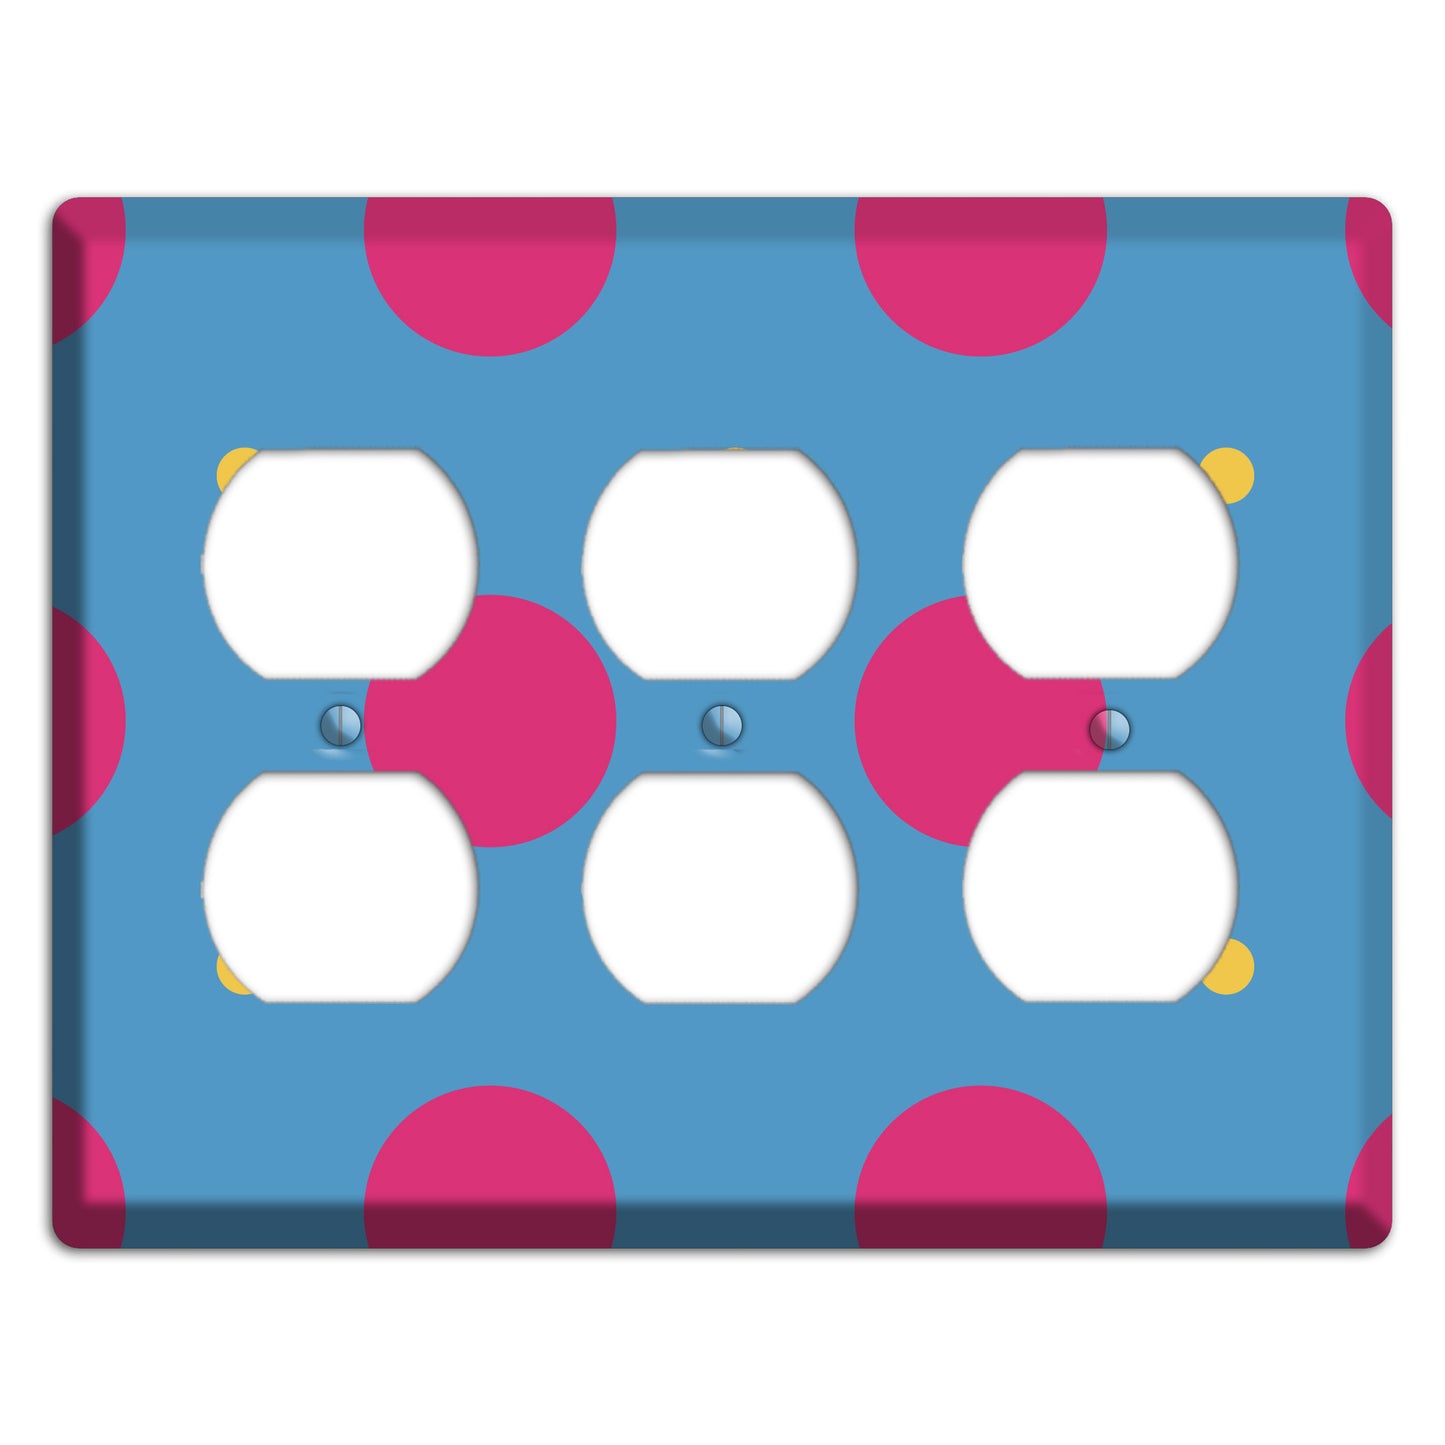 Blue with Pink and Yellow Multi Tiled Medium Dots 3 Duplex Wallplate